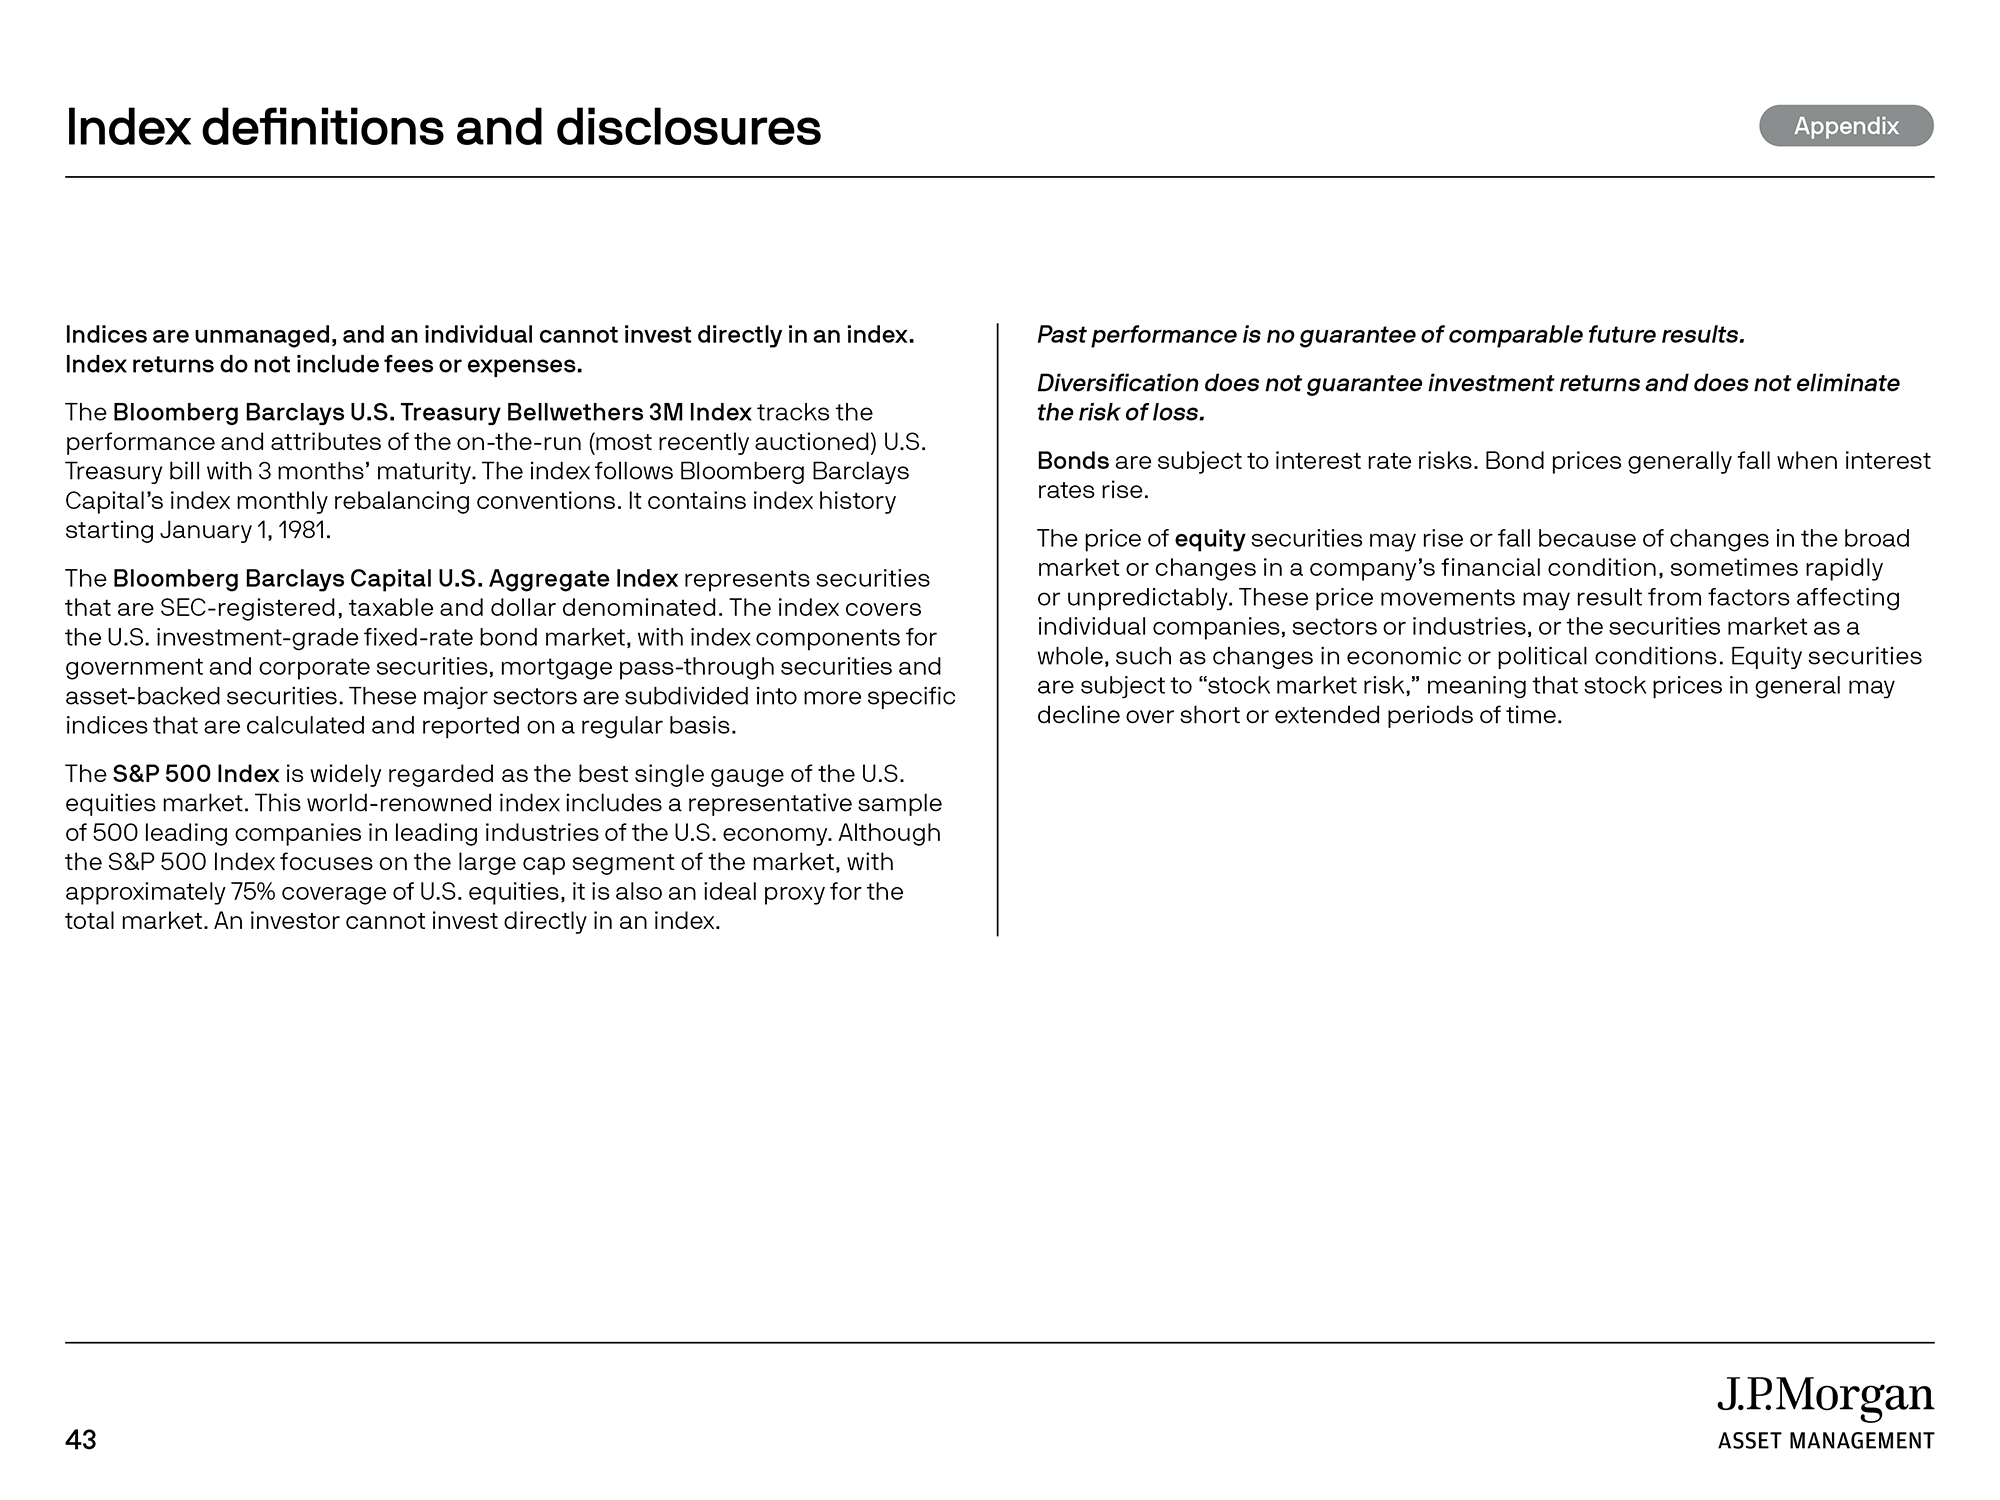 Index definitions and disclosures